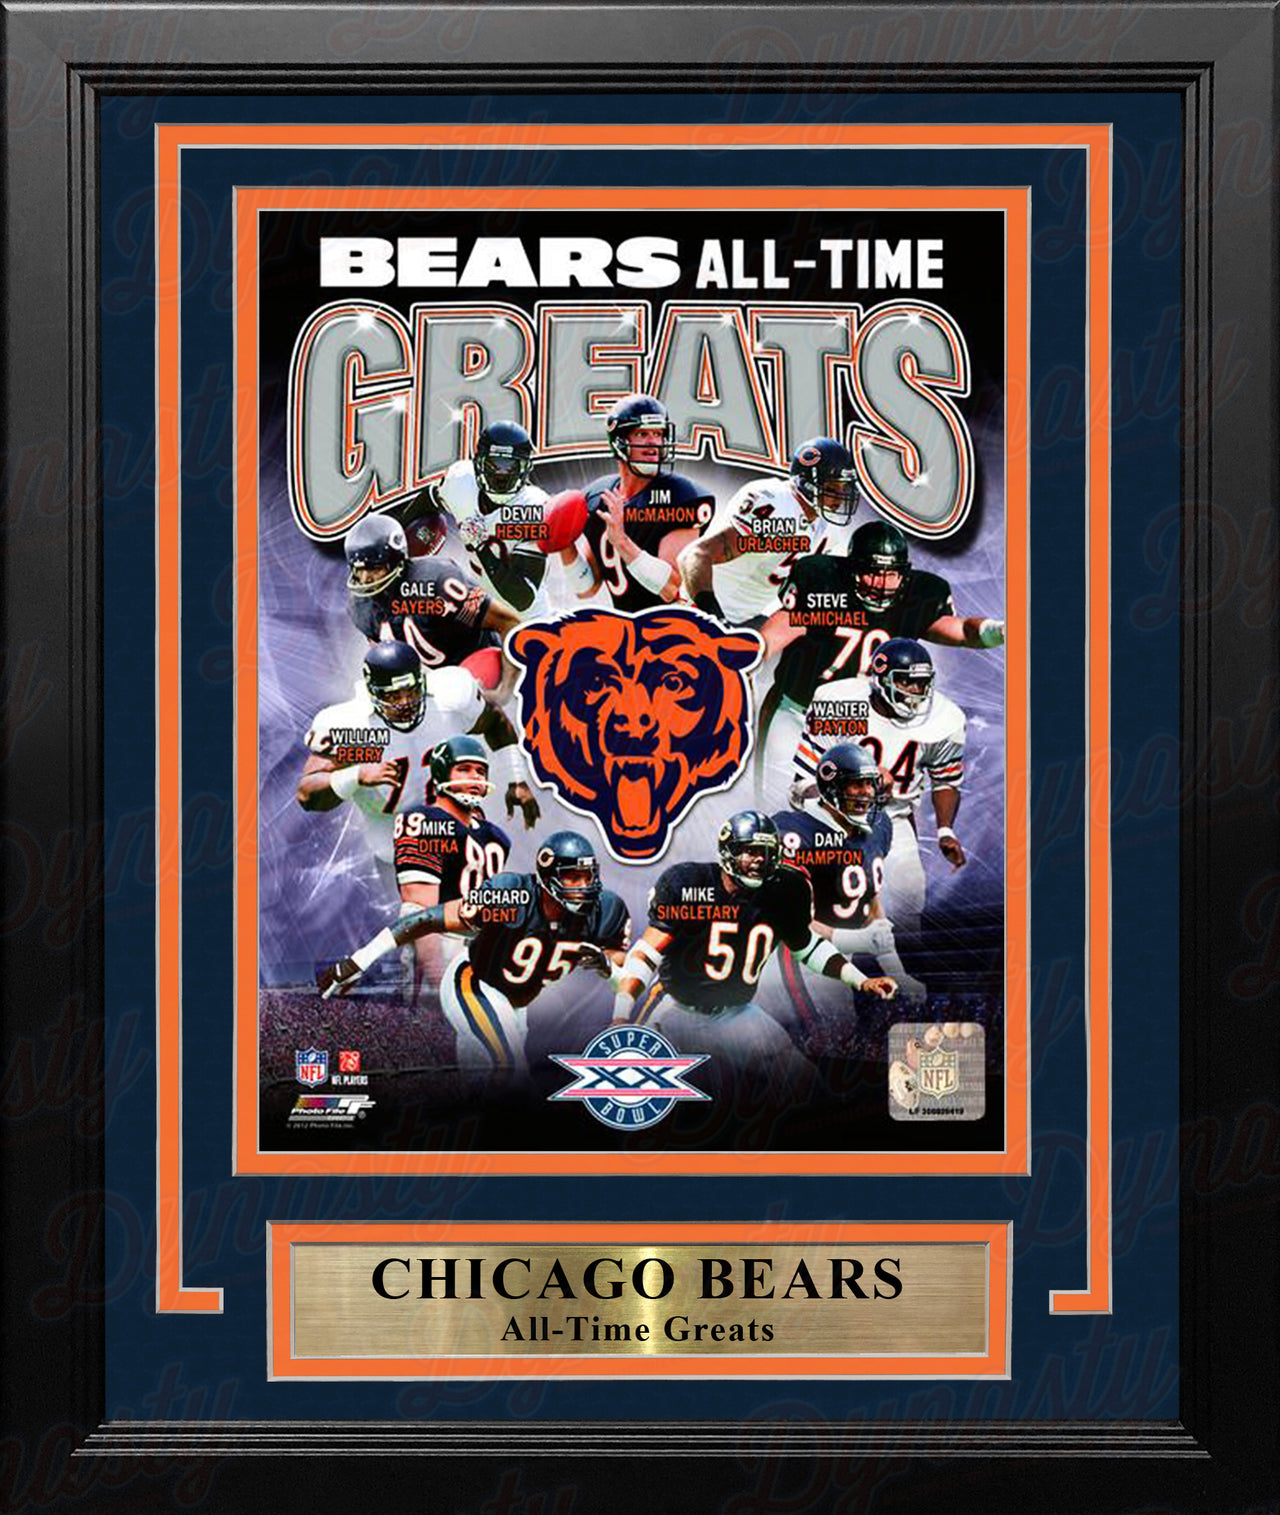 Chicago Bears All-Time Greats 8" x 10" Framed Football Photo - Dynasty Sports & Framing 